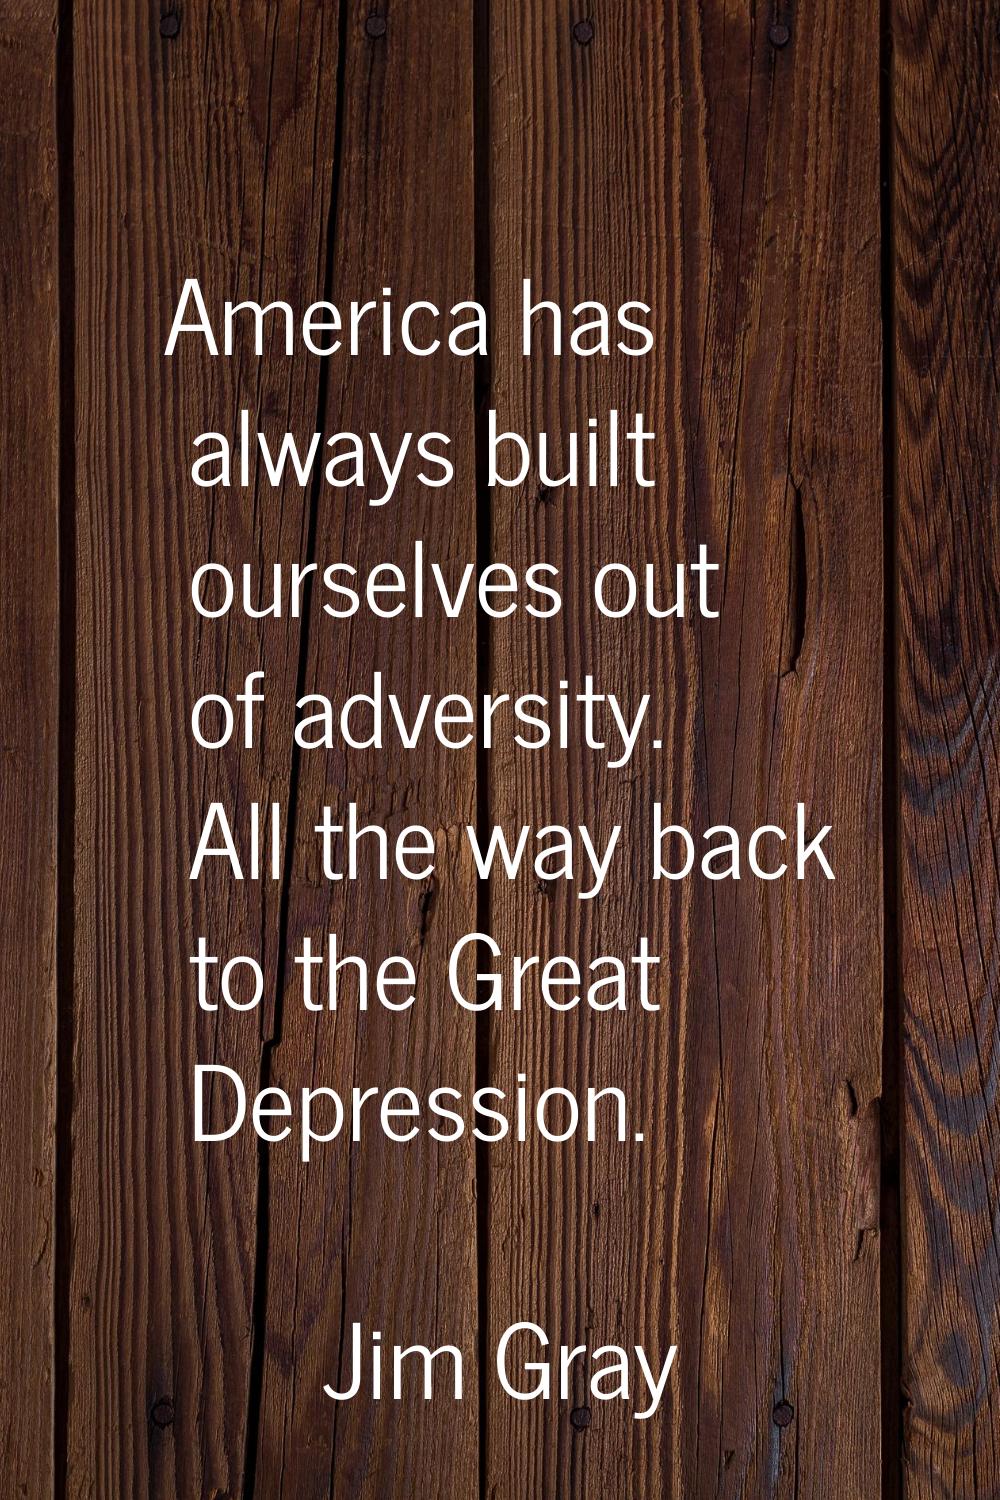 America has always built ourselves out of adversity. All the way back to the Great Depression.